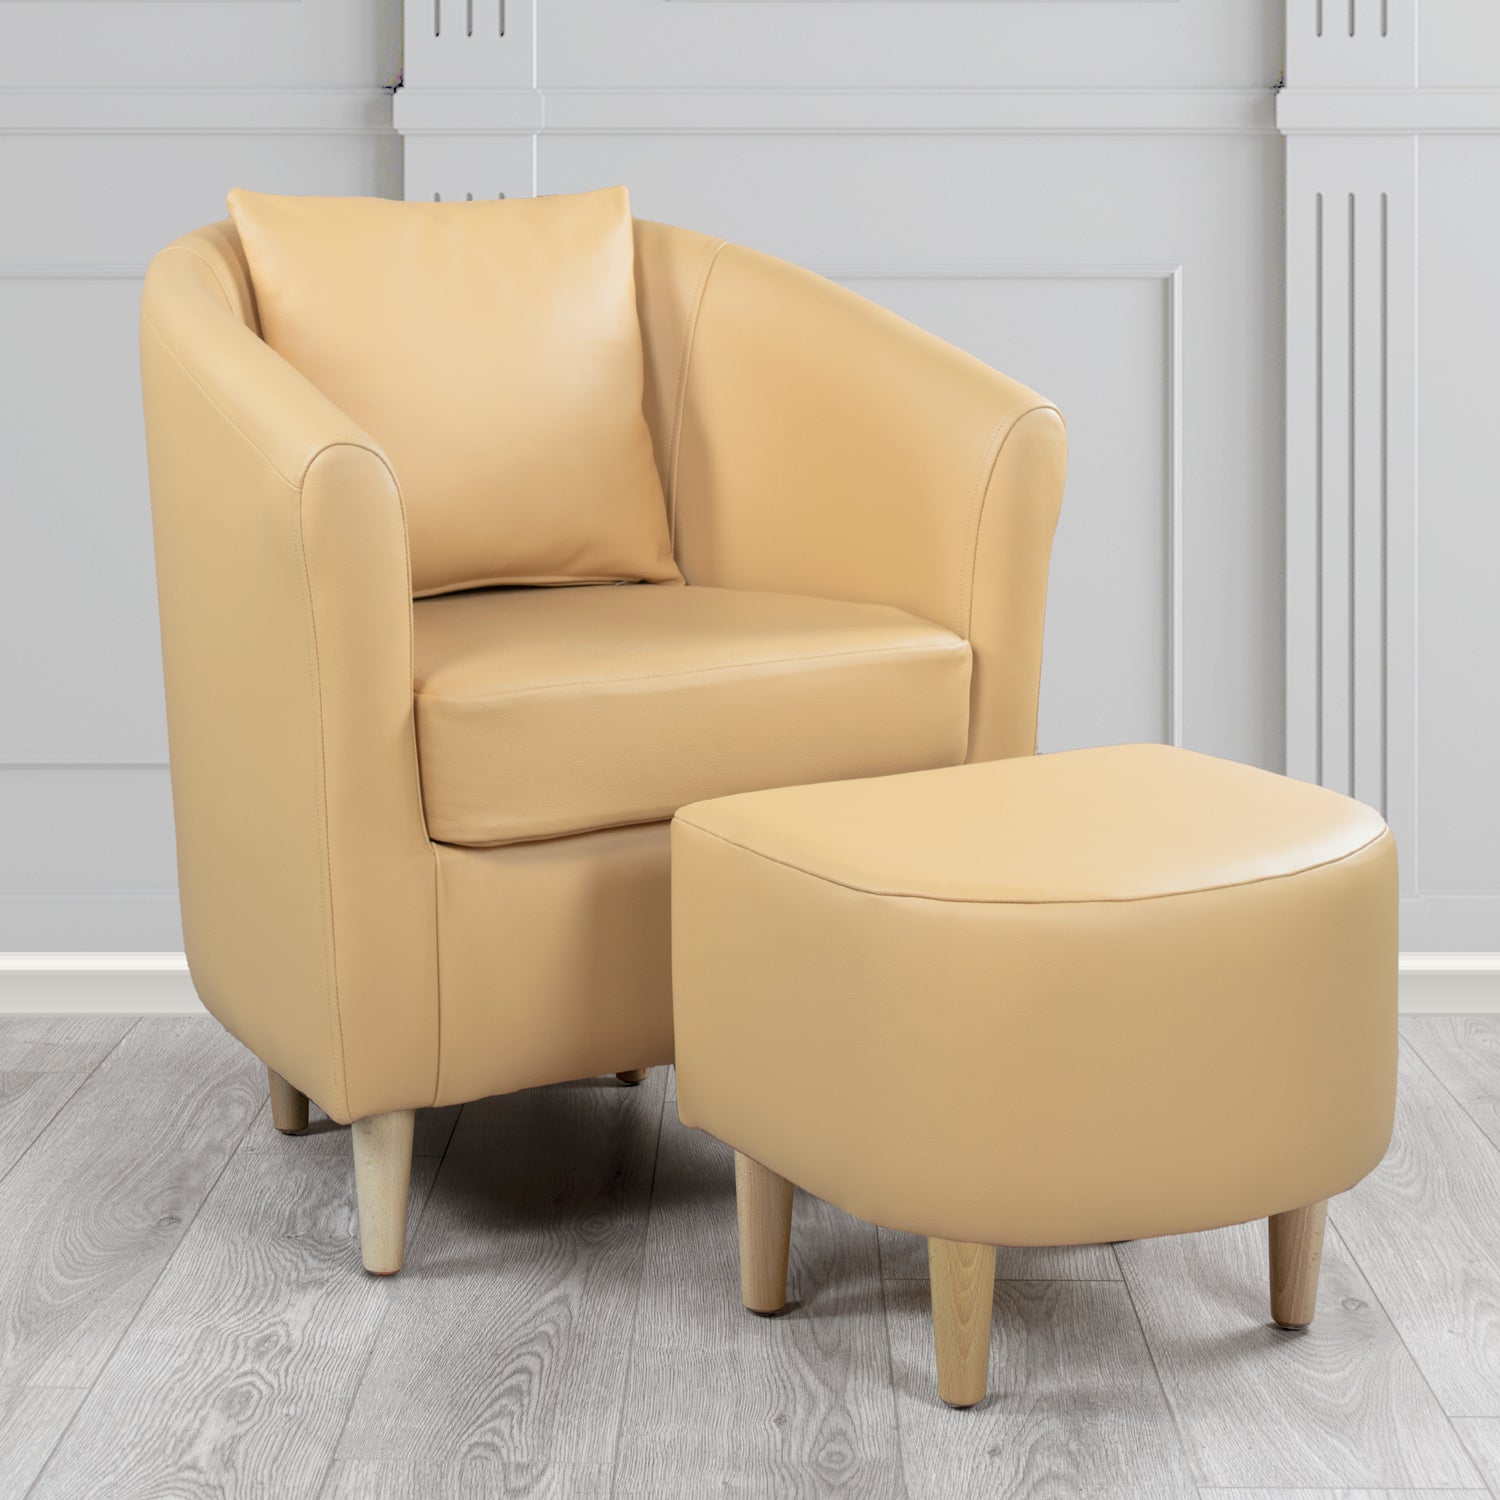 St Tropez Shelly Stone Crib 5 Genuine Leather Tub Chair & Footstool Set With Scatter Cushion (6619540127786)